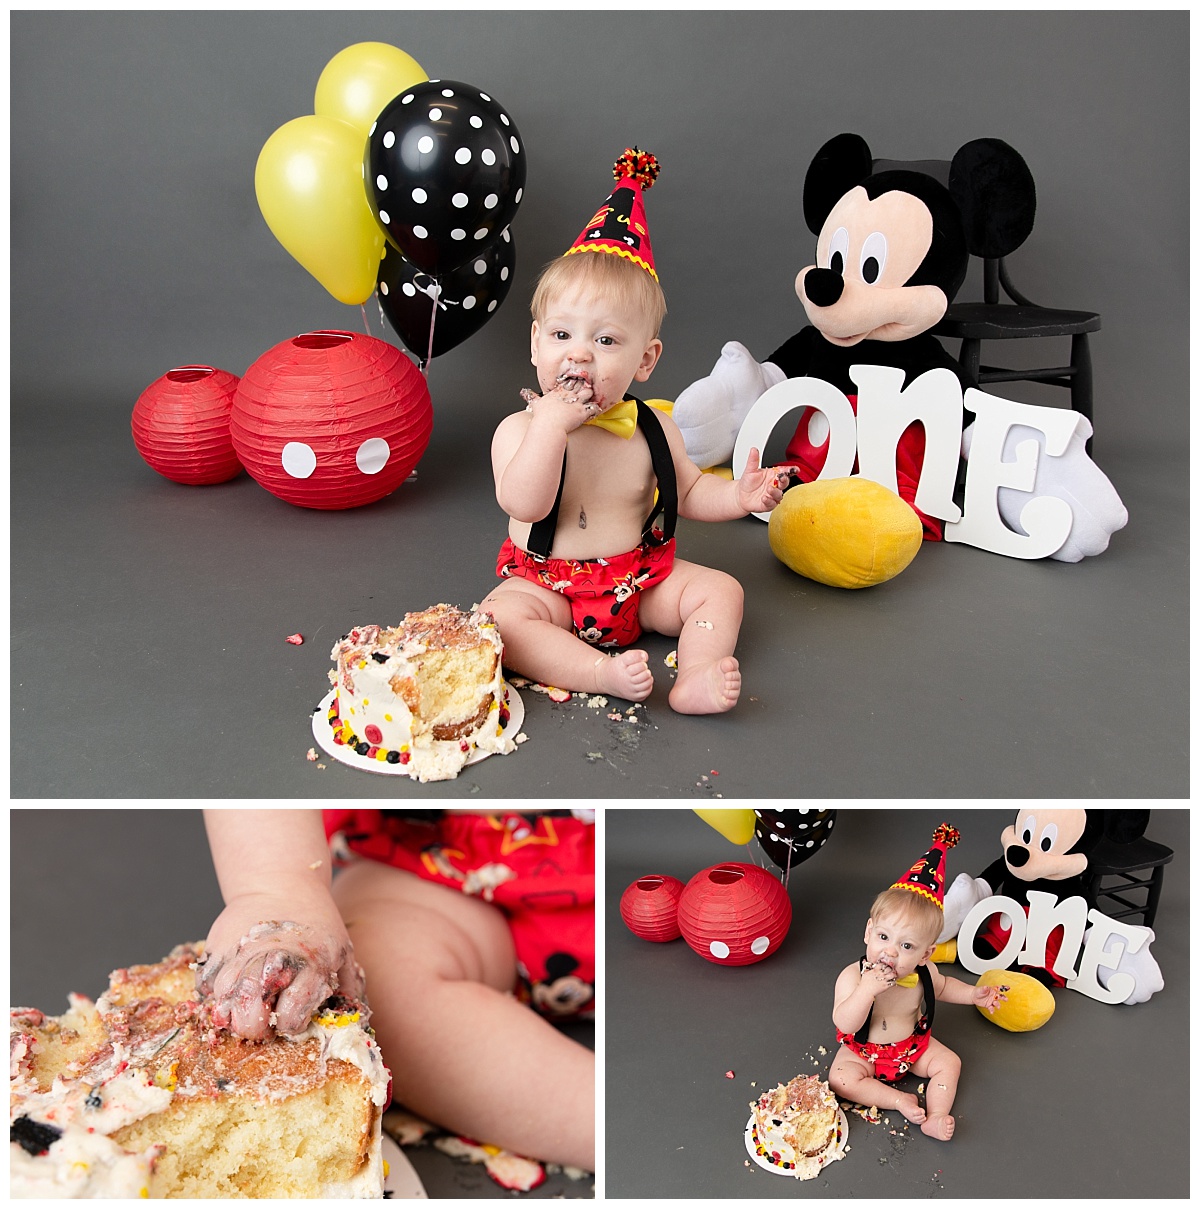 st-louis-cake-samsh-photographer-one-year-old-boy-mickey-mouse-theme-collage (2).jpg